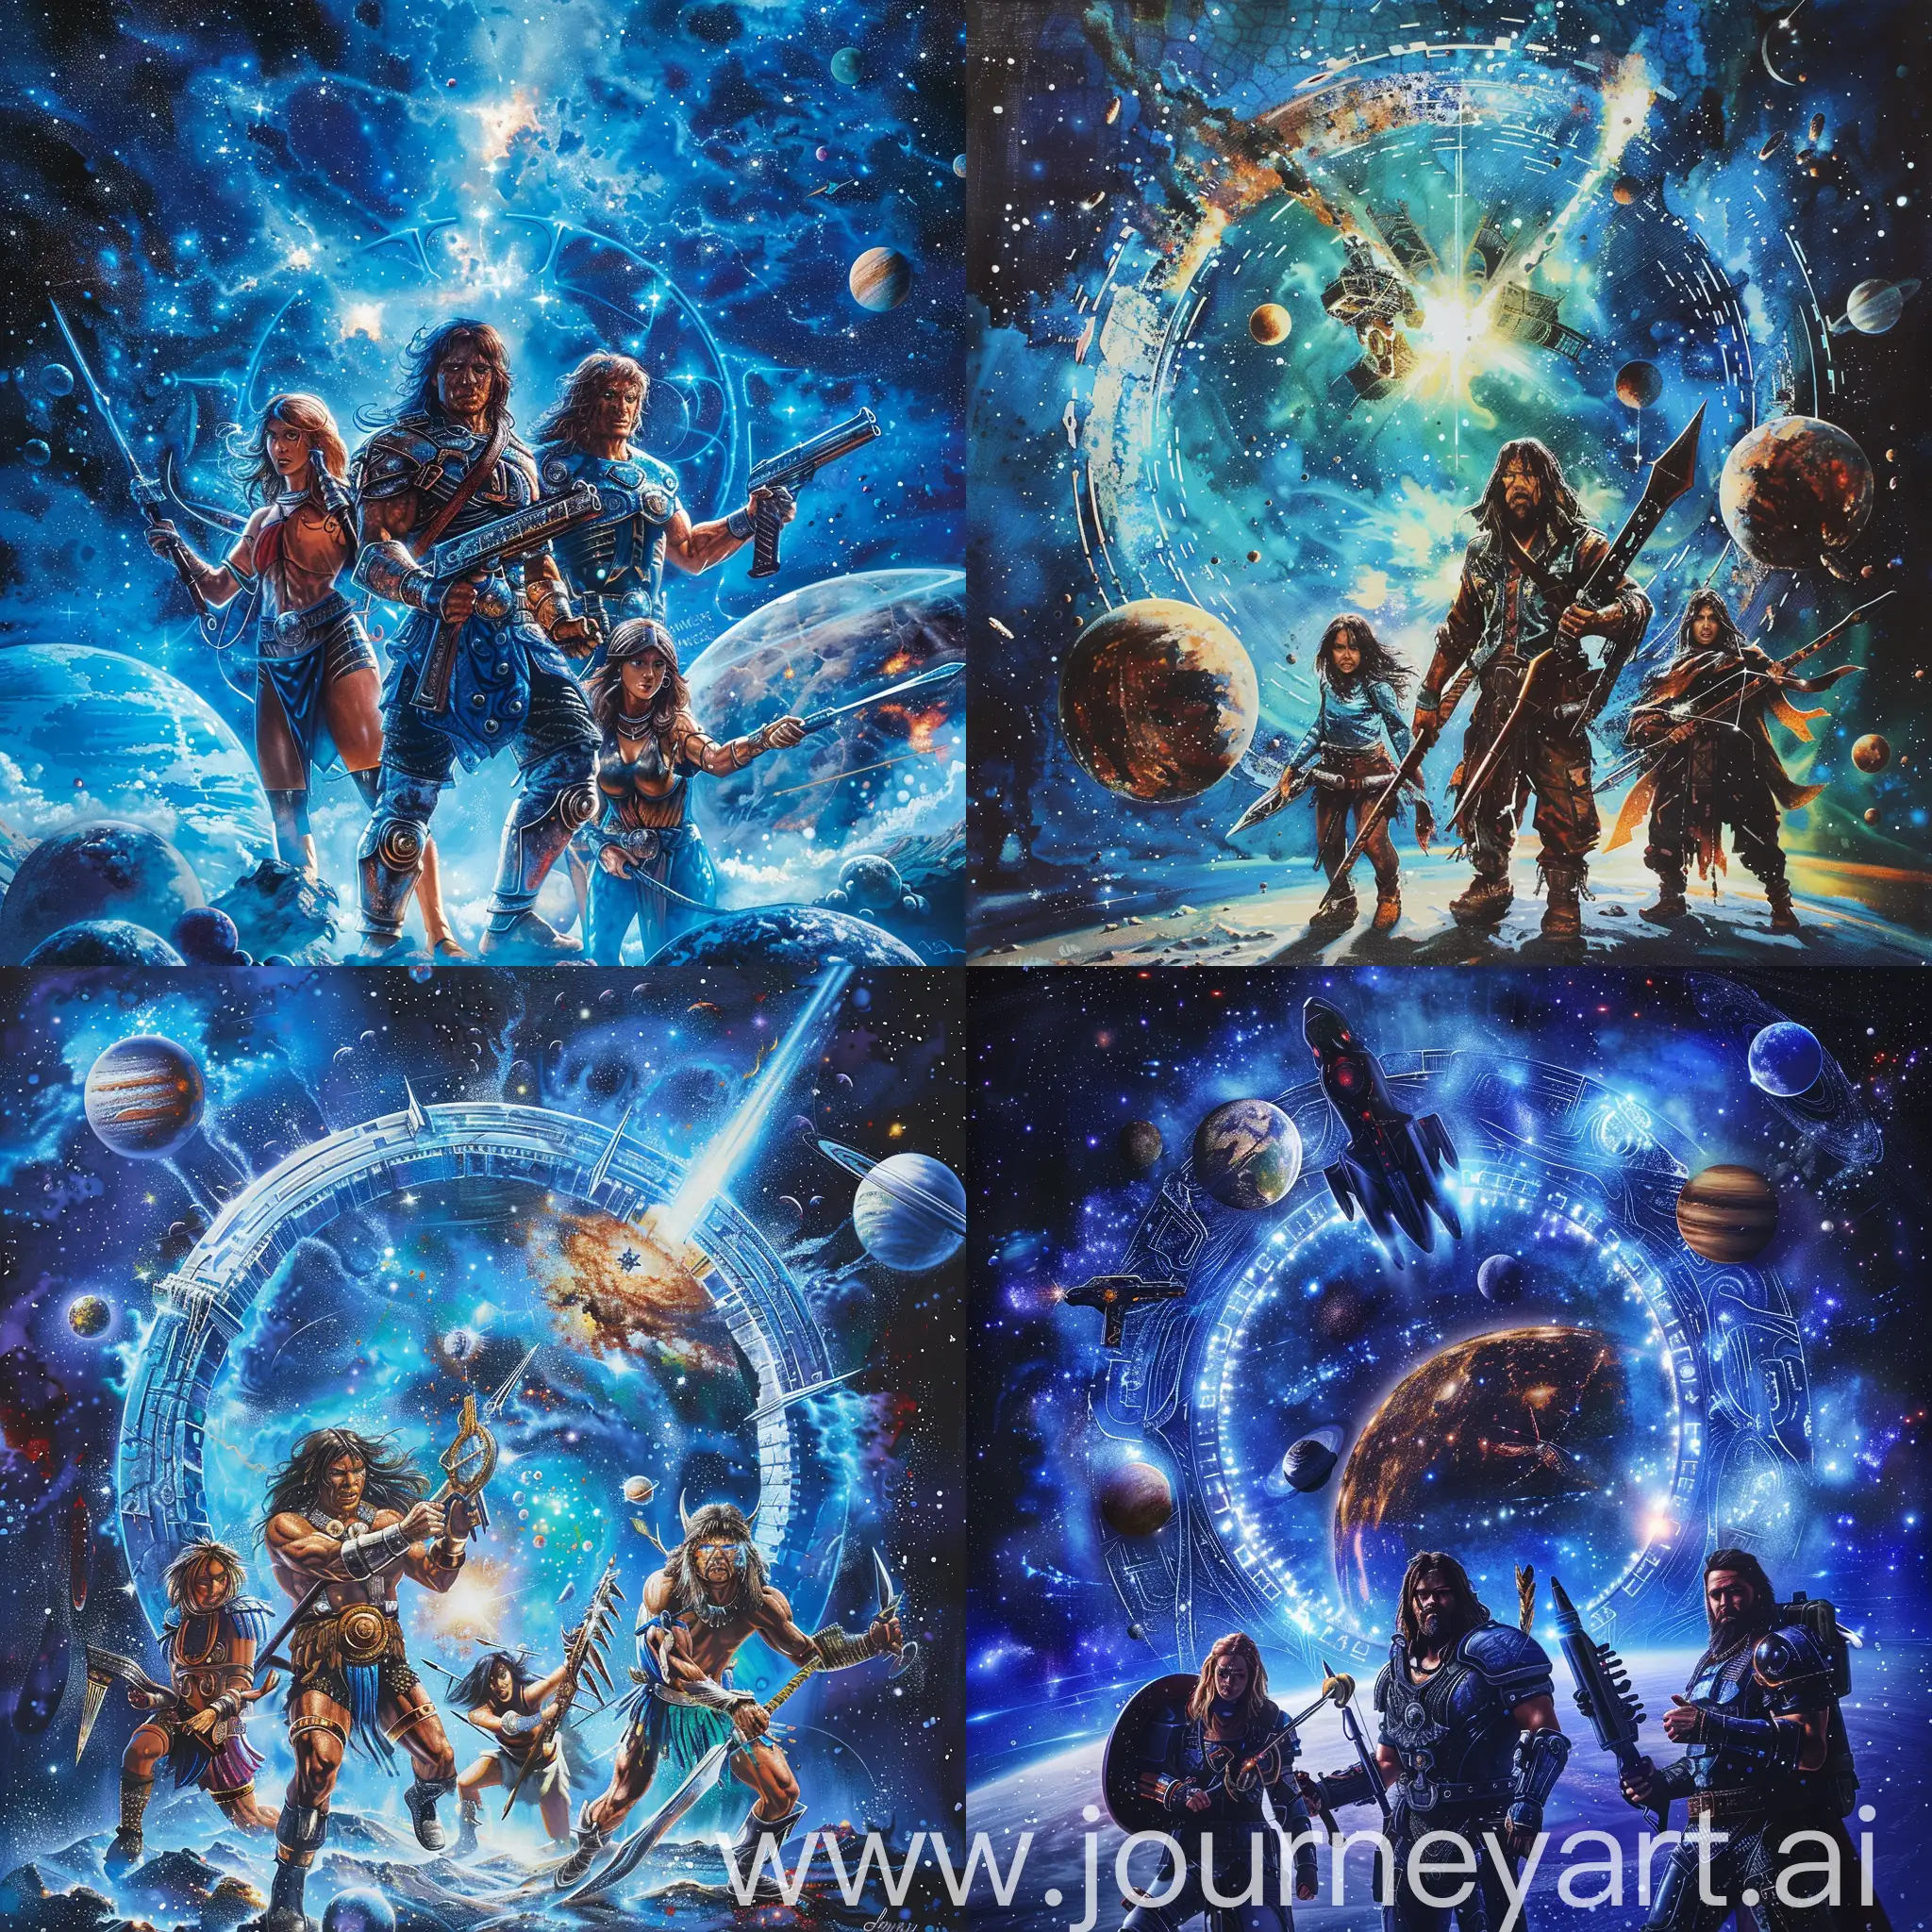 against the background of a galaxy of bluish shades, a stargate and planets are depicted in front of the background star warriors 3 men and one girl in their hands with weapons